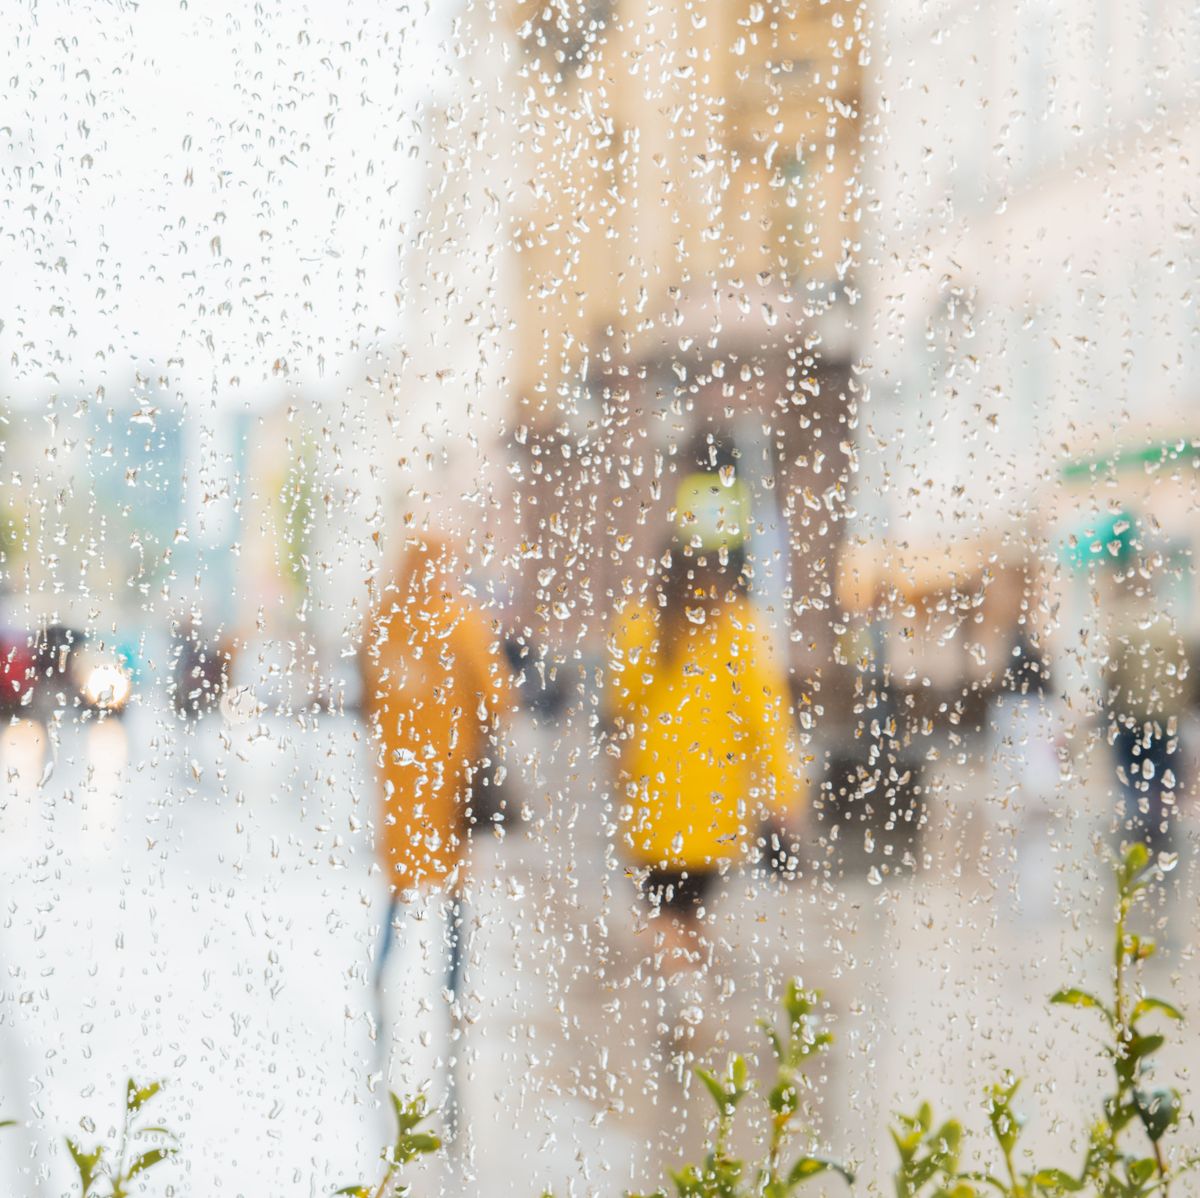 rain on a window, looking out to people in a street scene